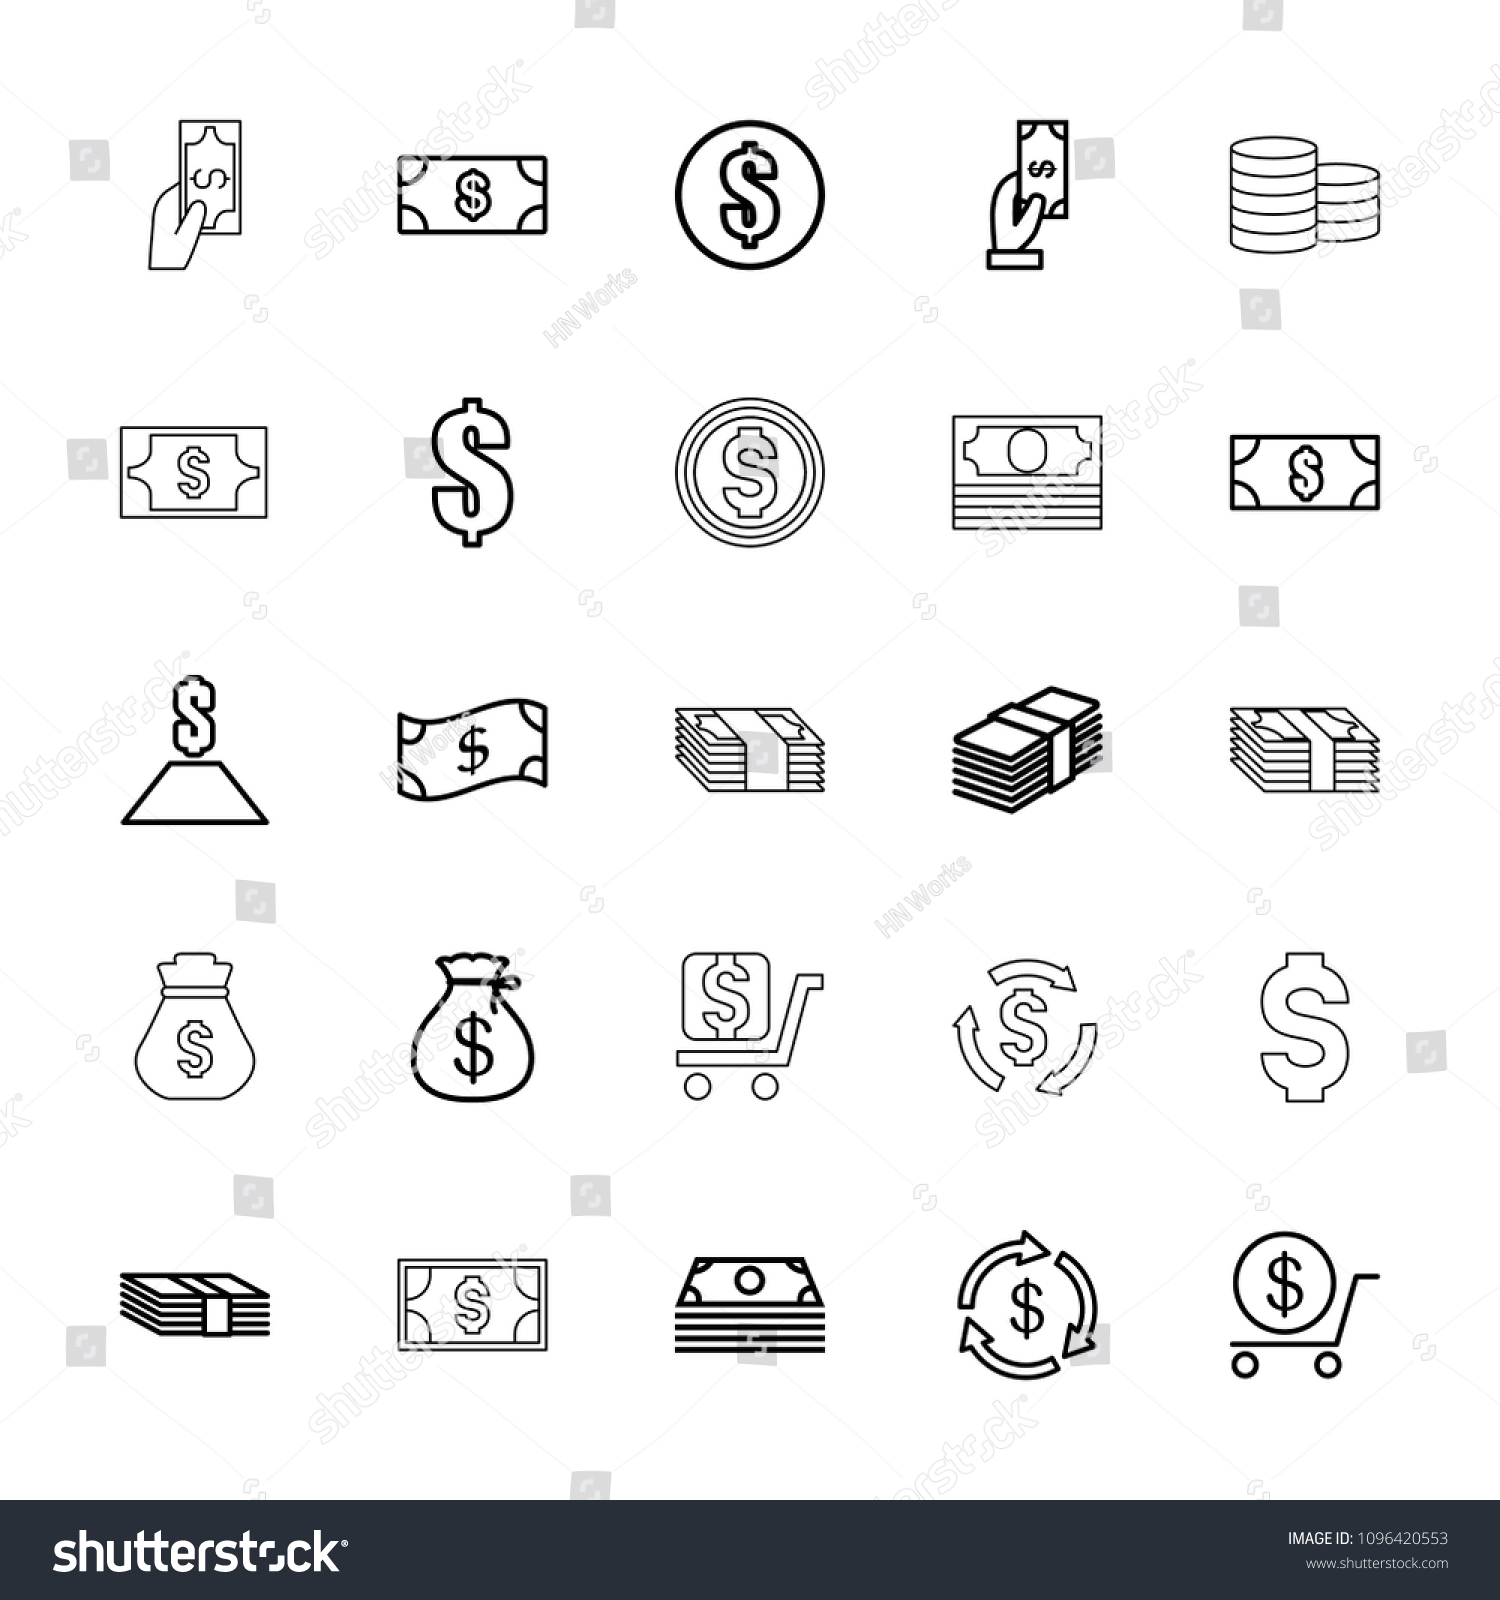 Tax icon. collection of 25 tax outline icons such as money, money sack, payment, dollar, money. editable tax icons for web and mobile. #1096420553